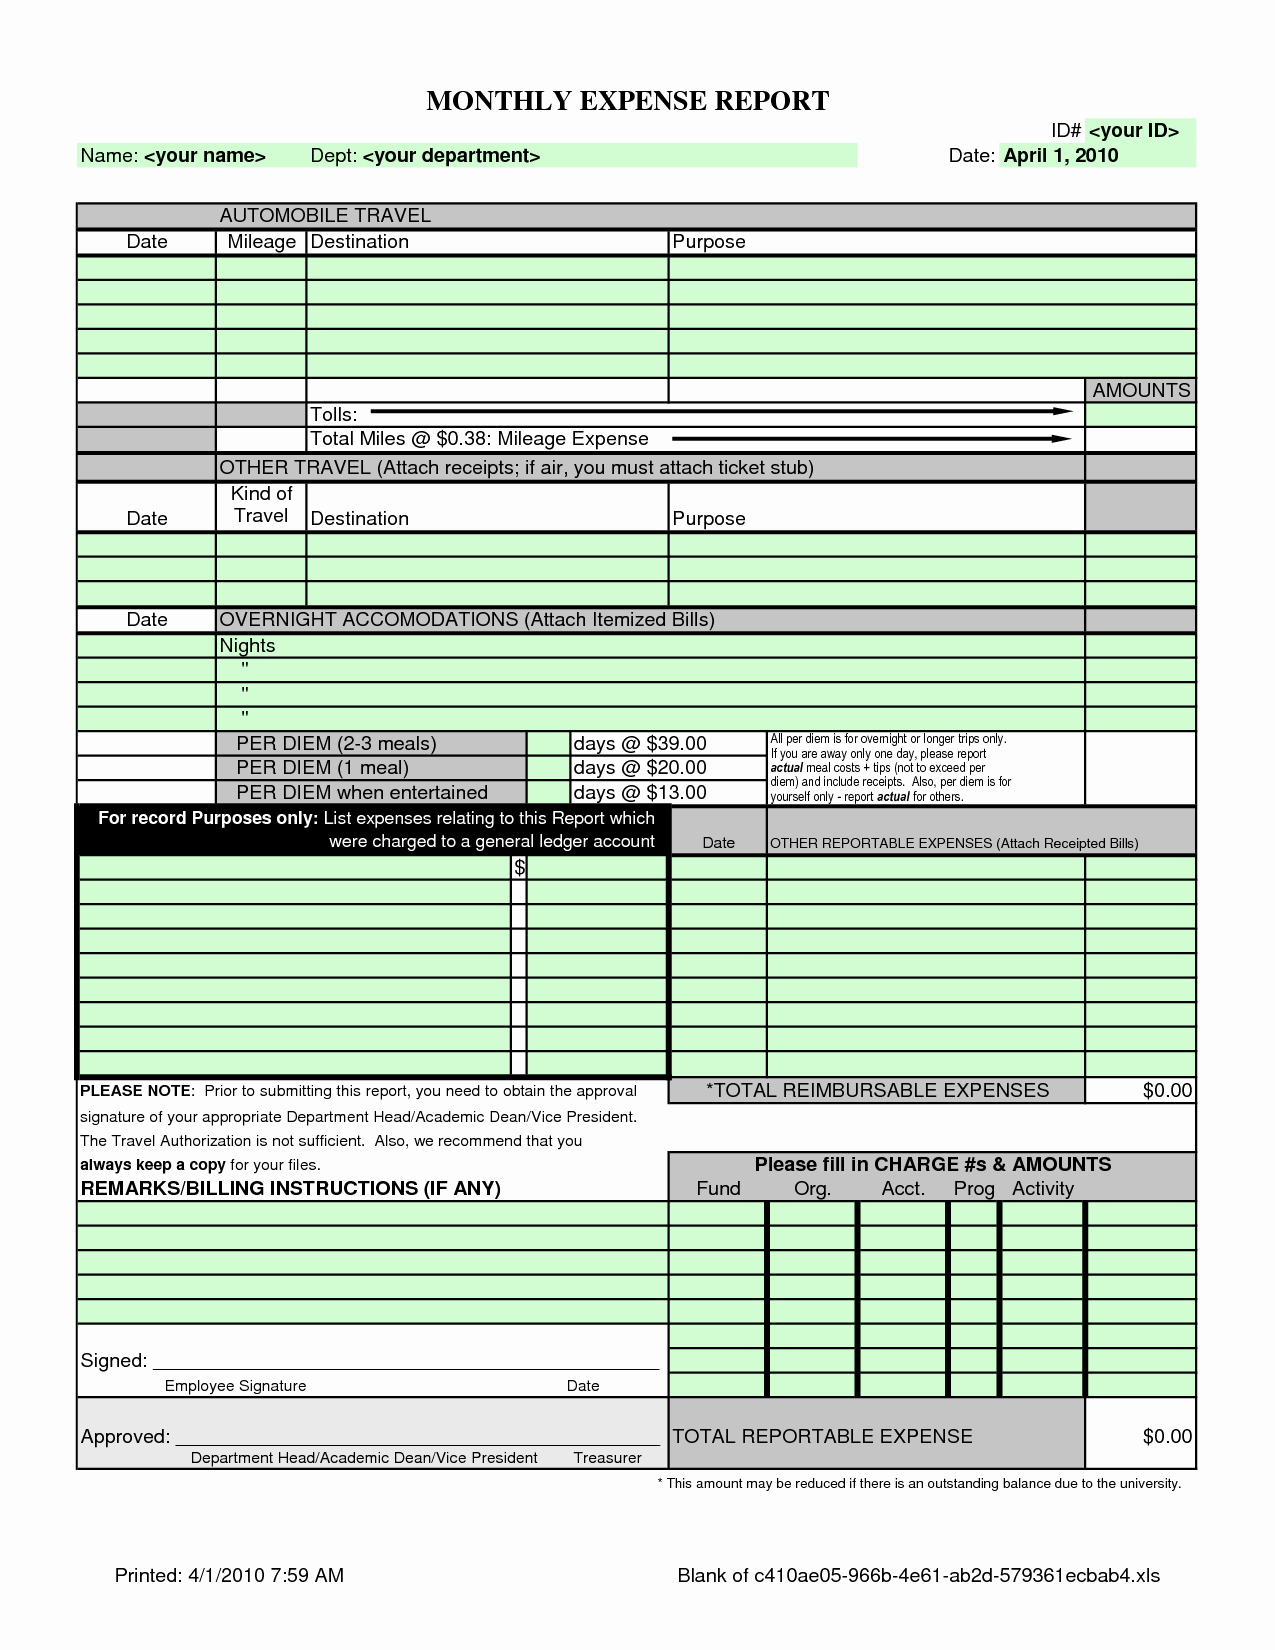 Monthly Expense Report Template Beautiful Monthly Expense Report Template